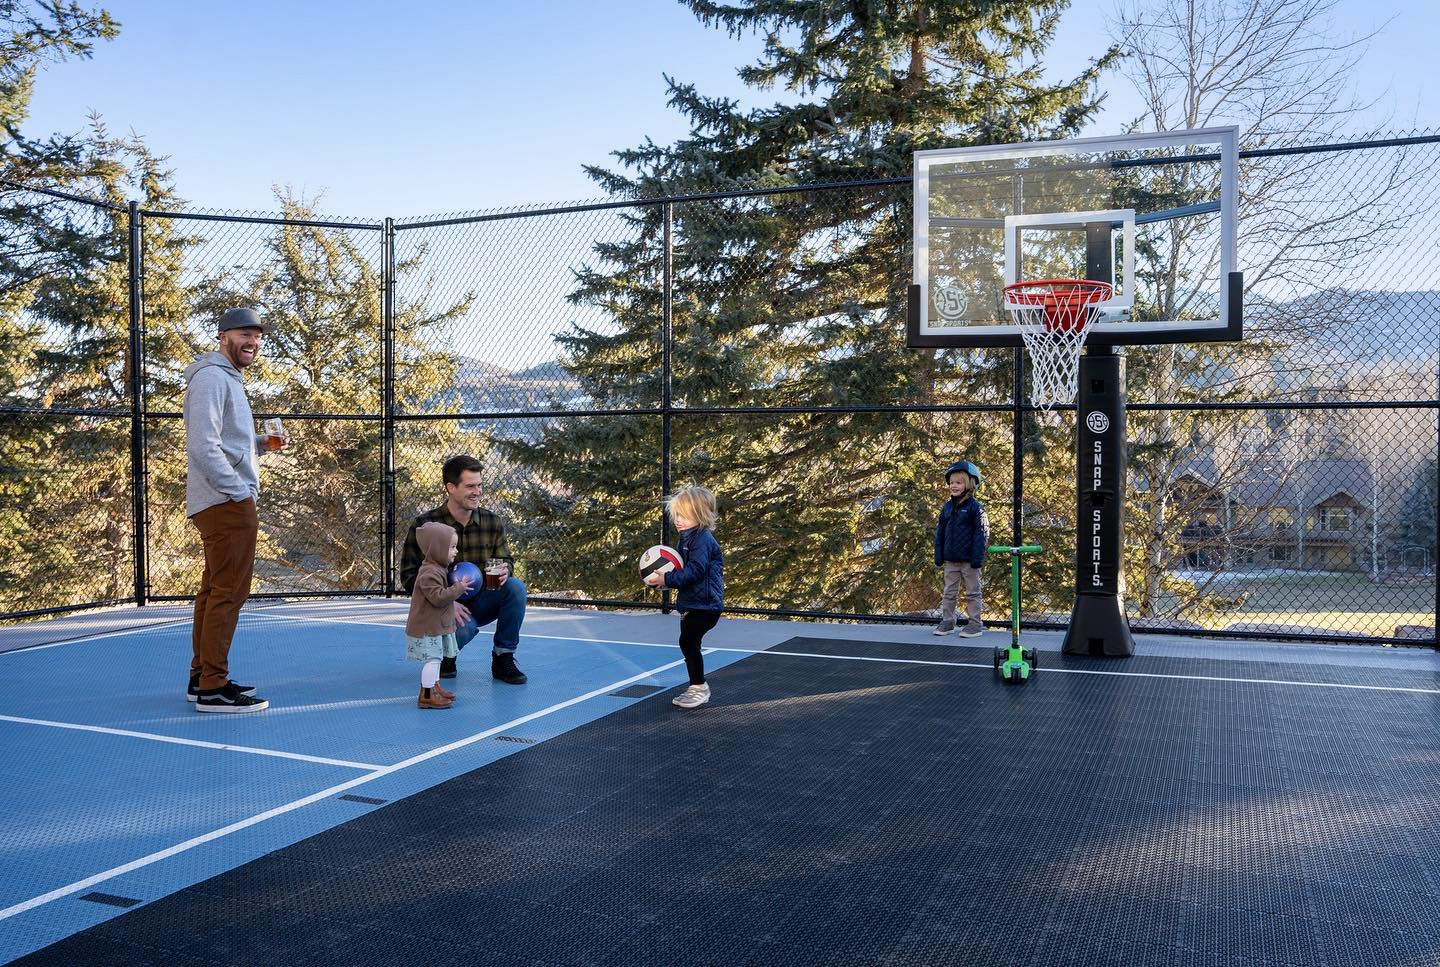 Dads and kids playing on a multi-court, with basketball hoop adjusted to kid height